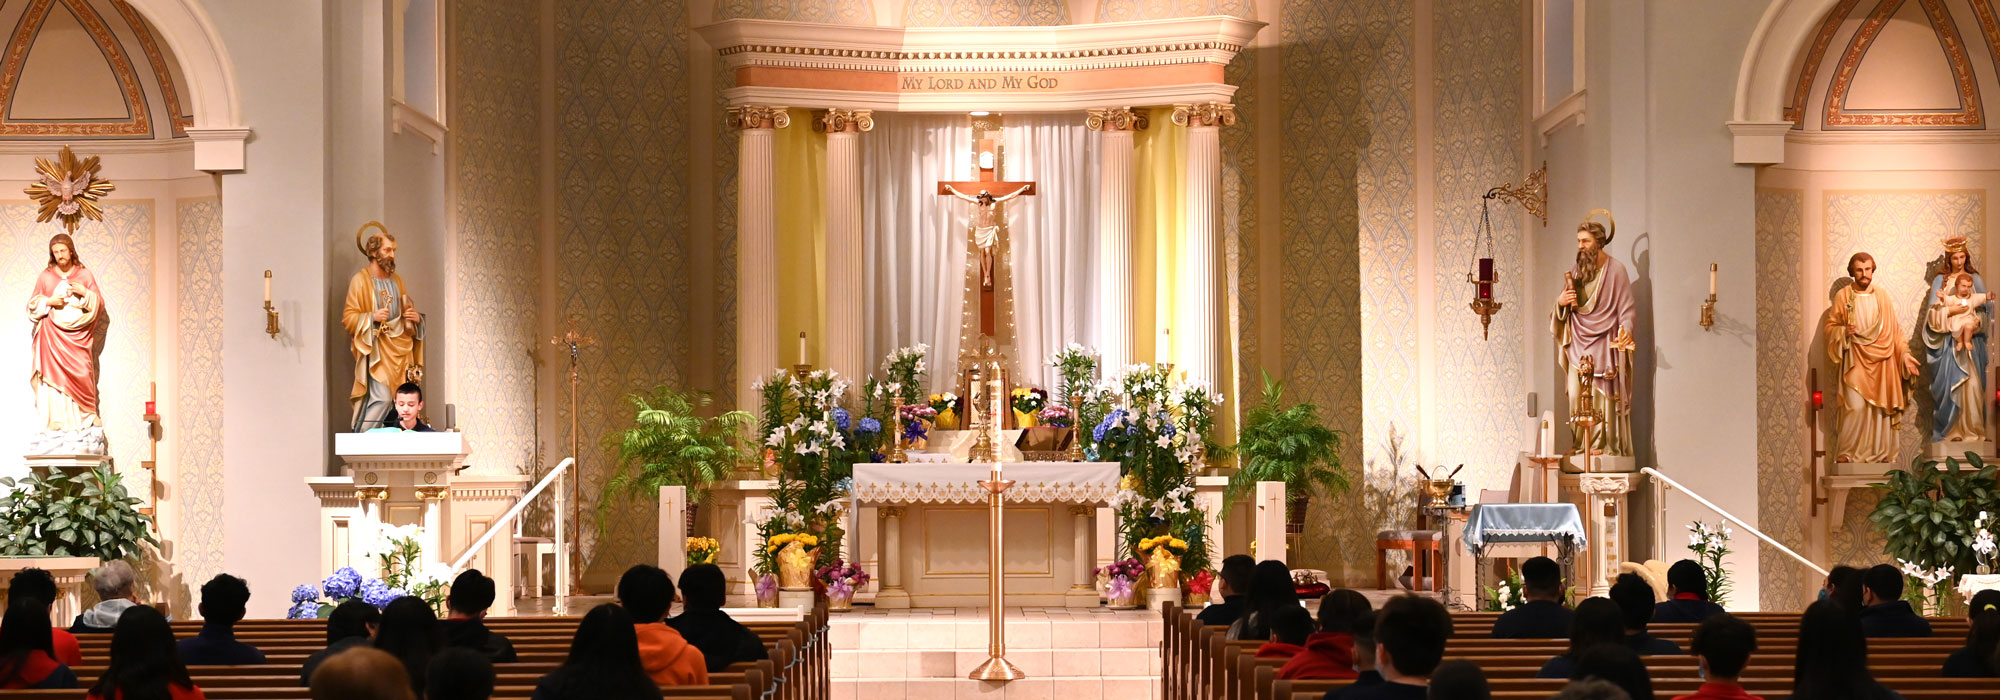 view of mass